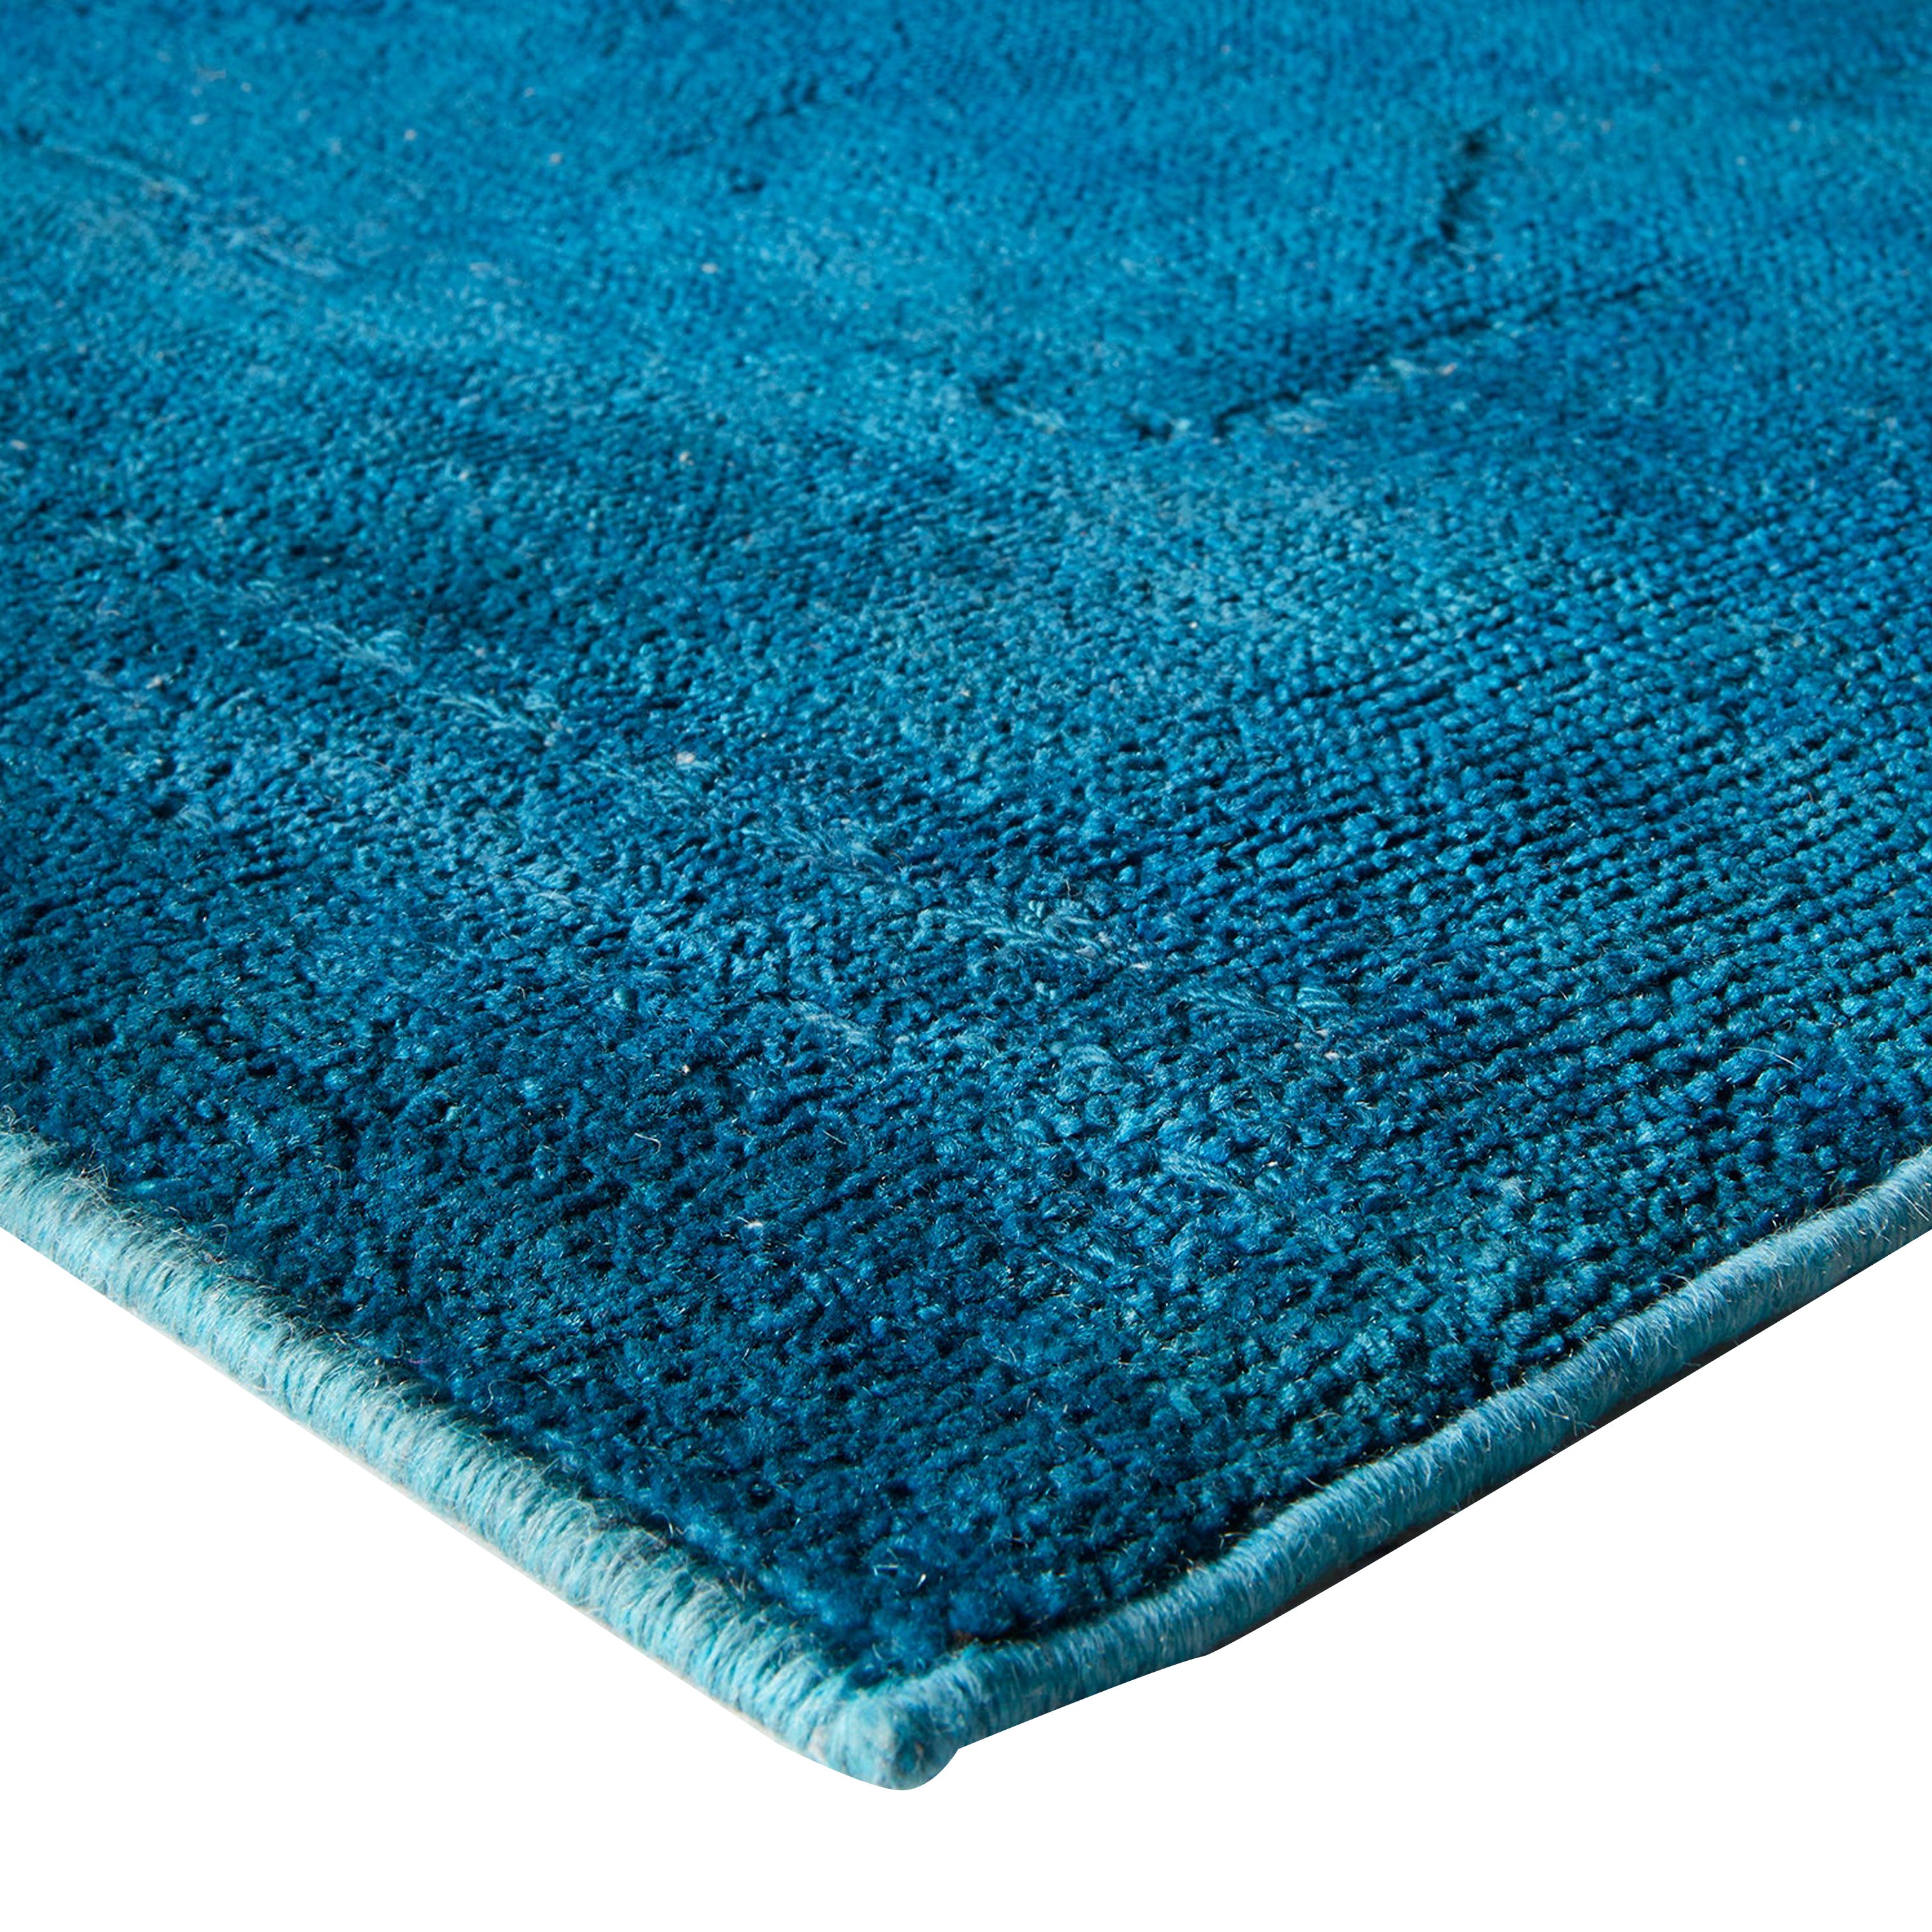 Blue Overdyed Wool Rug - 4'5" x 5'5"